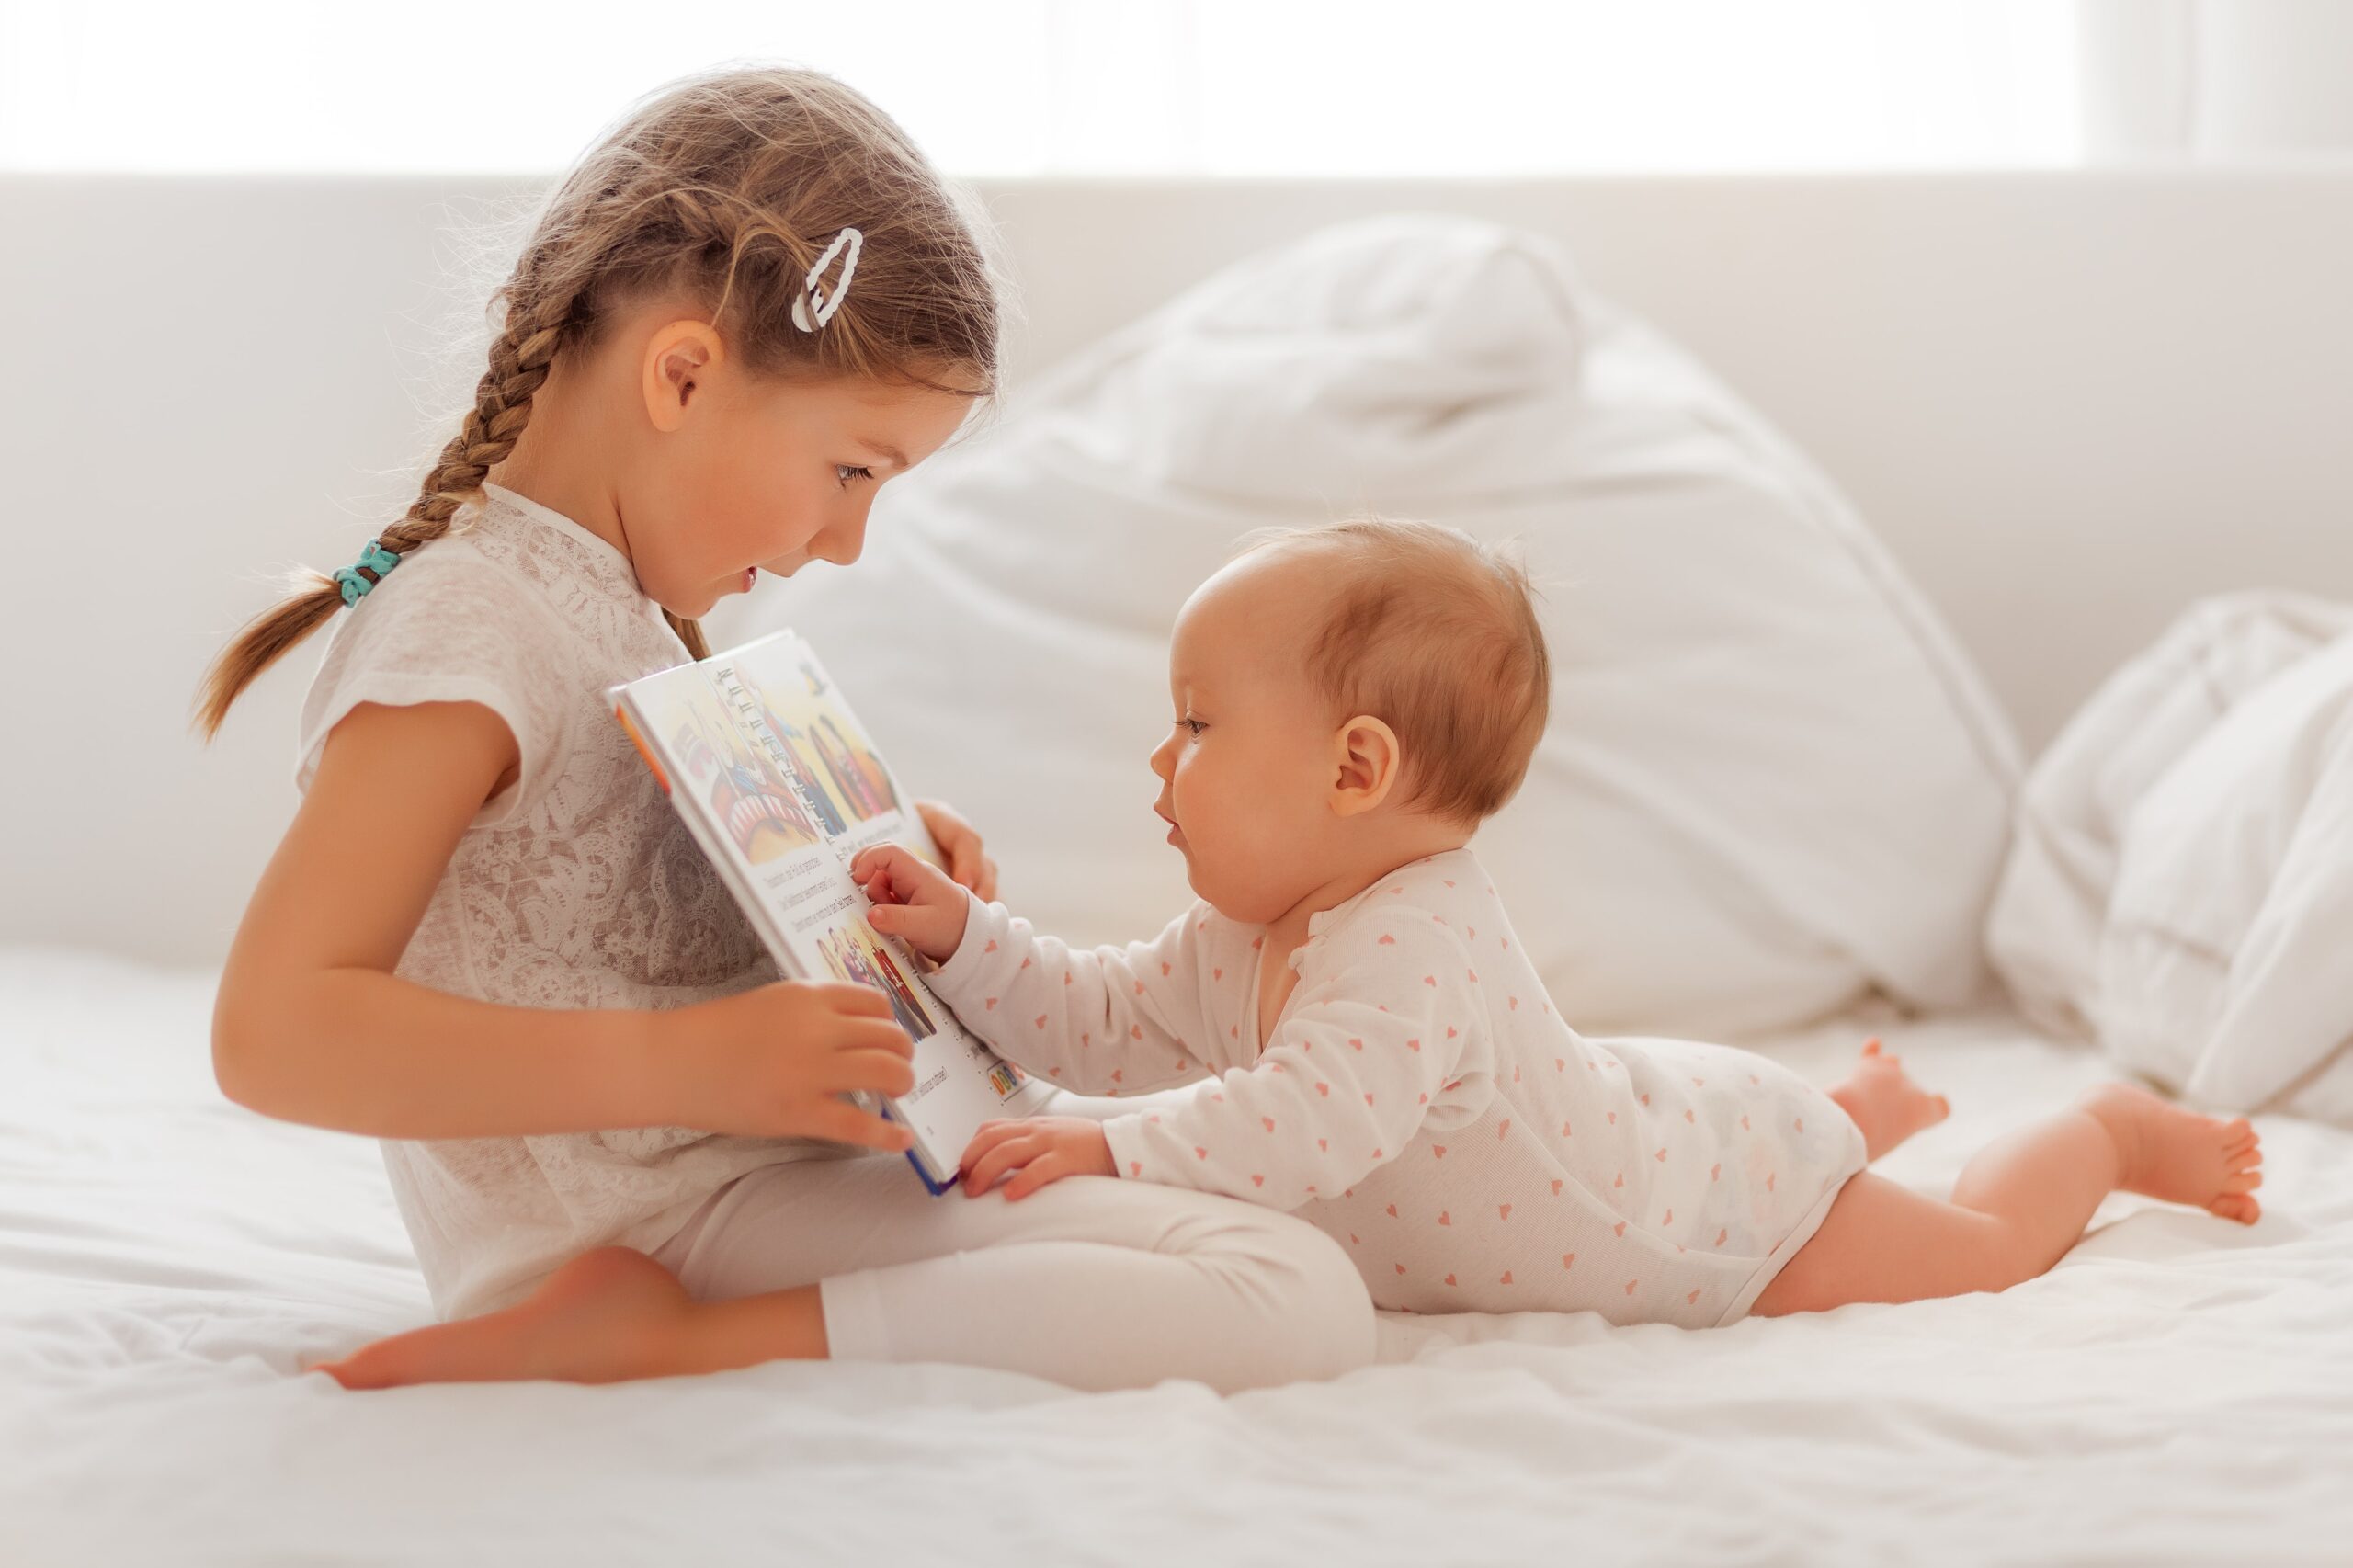 young girl reading book to baby sibling on bed